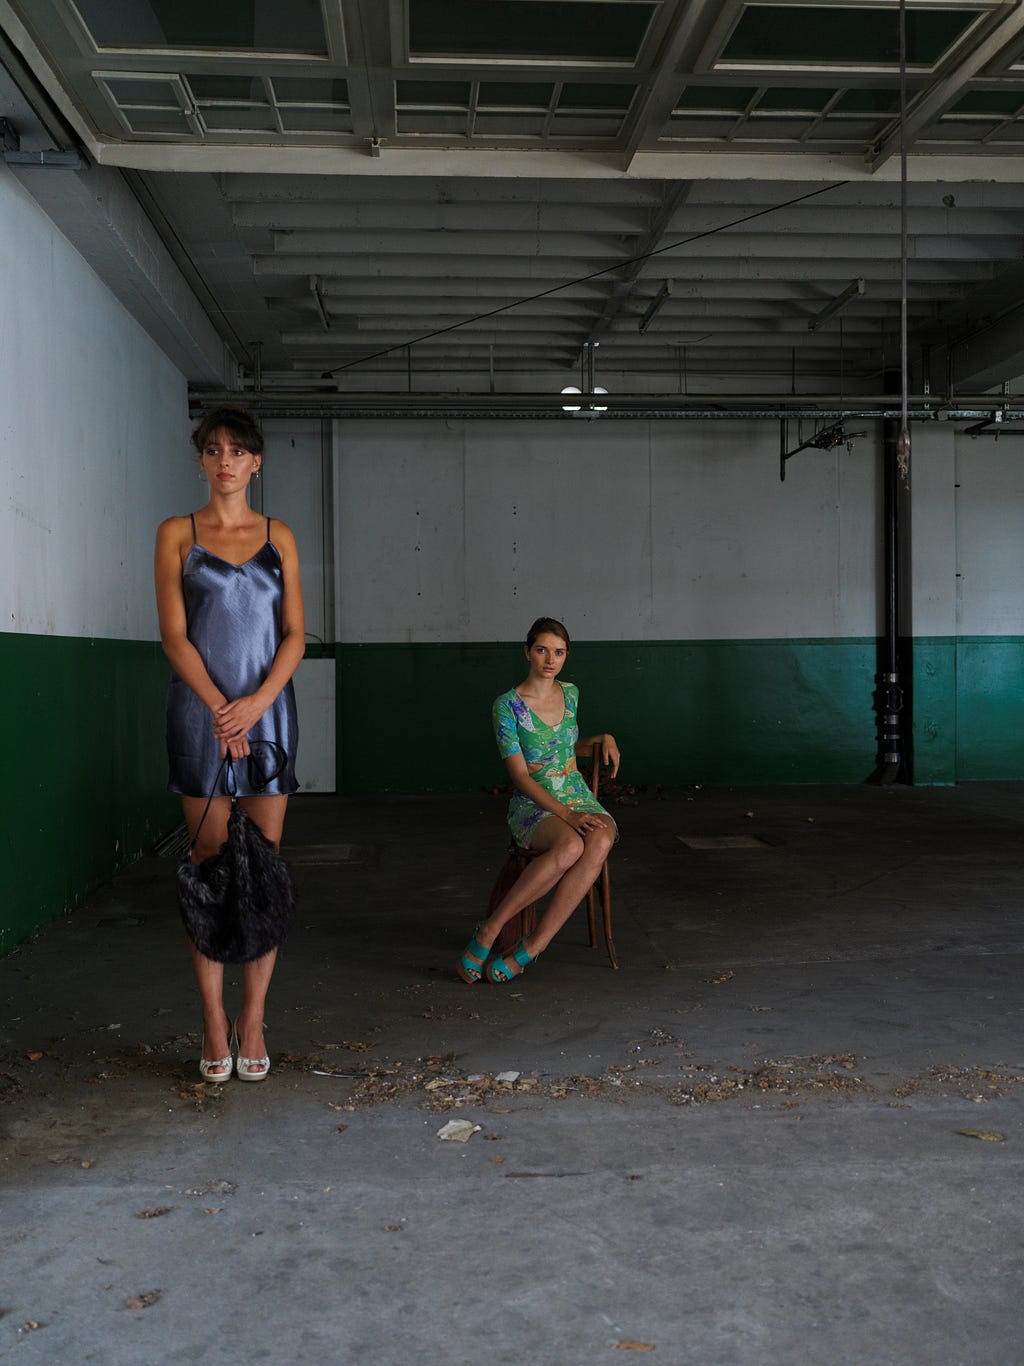 Empty garage, two models in short dress and a loaf of dried leaves